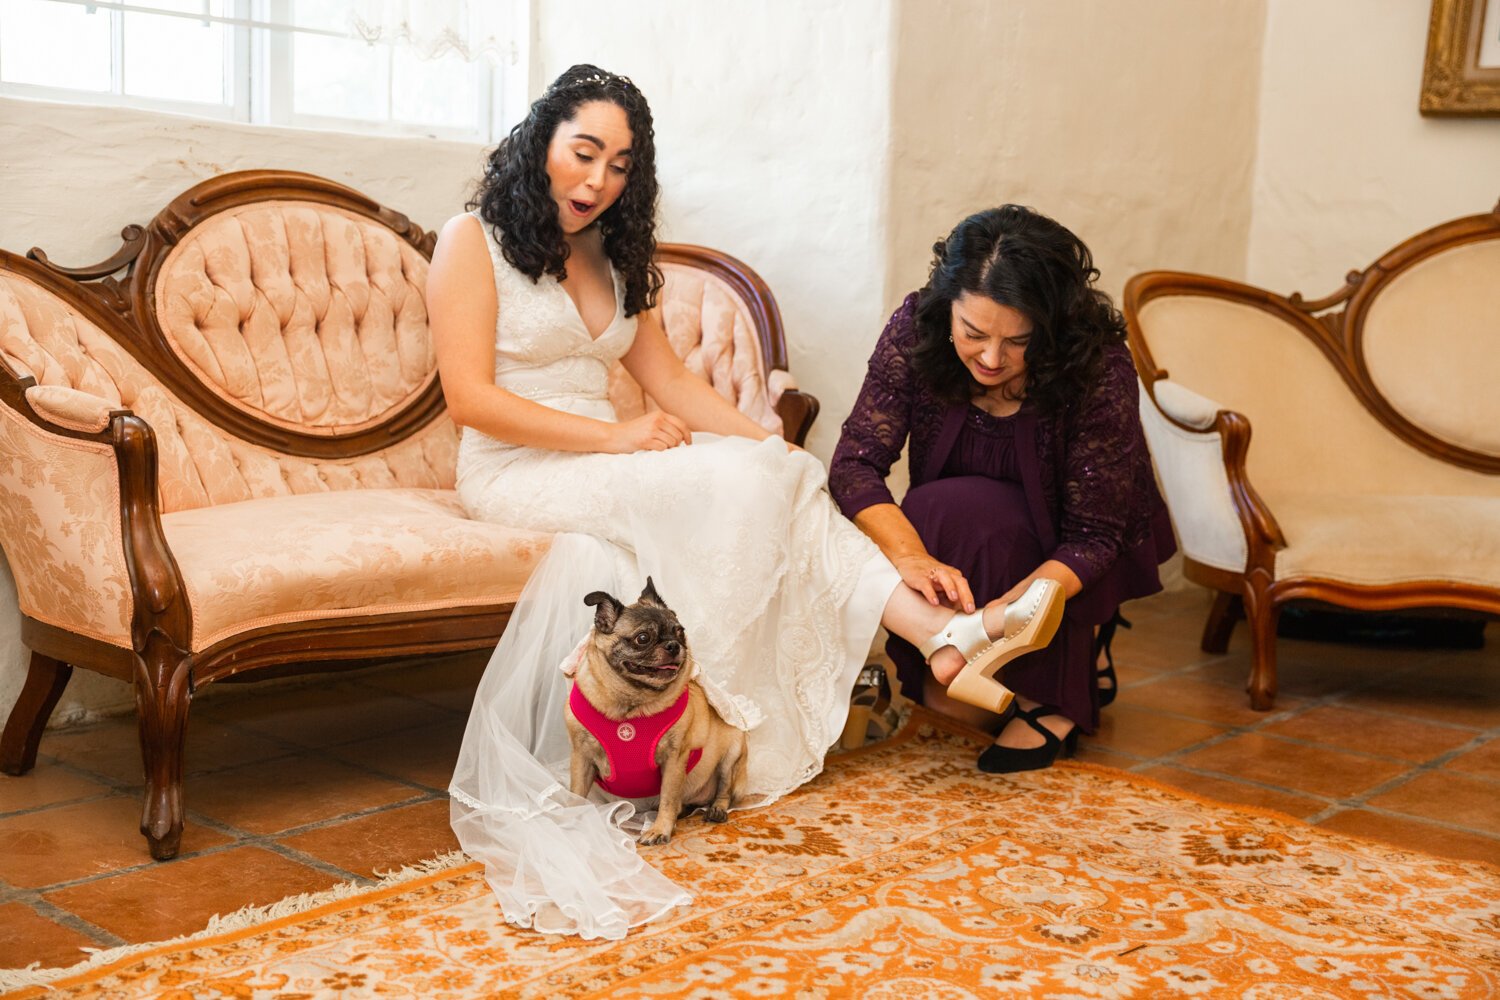  www.santabarbarawedding.com | SB Historical Museum | Veils &amp; Tails Photography | SB Wedding Coordinator | Grass Roots | LunaBella Makeup &amp; Hair | Accessorize Your Pug | Bride Getting Ready with Pug 